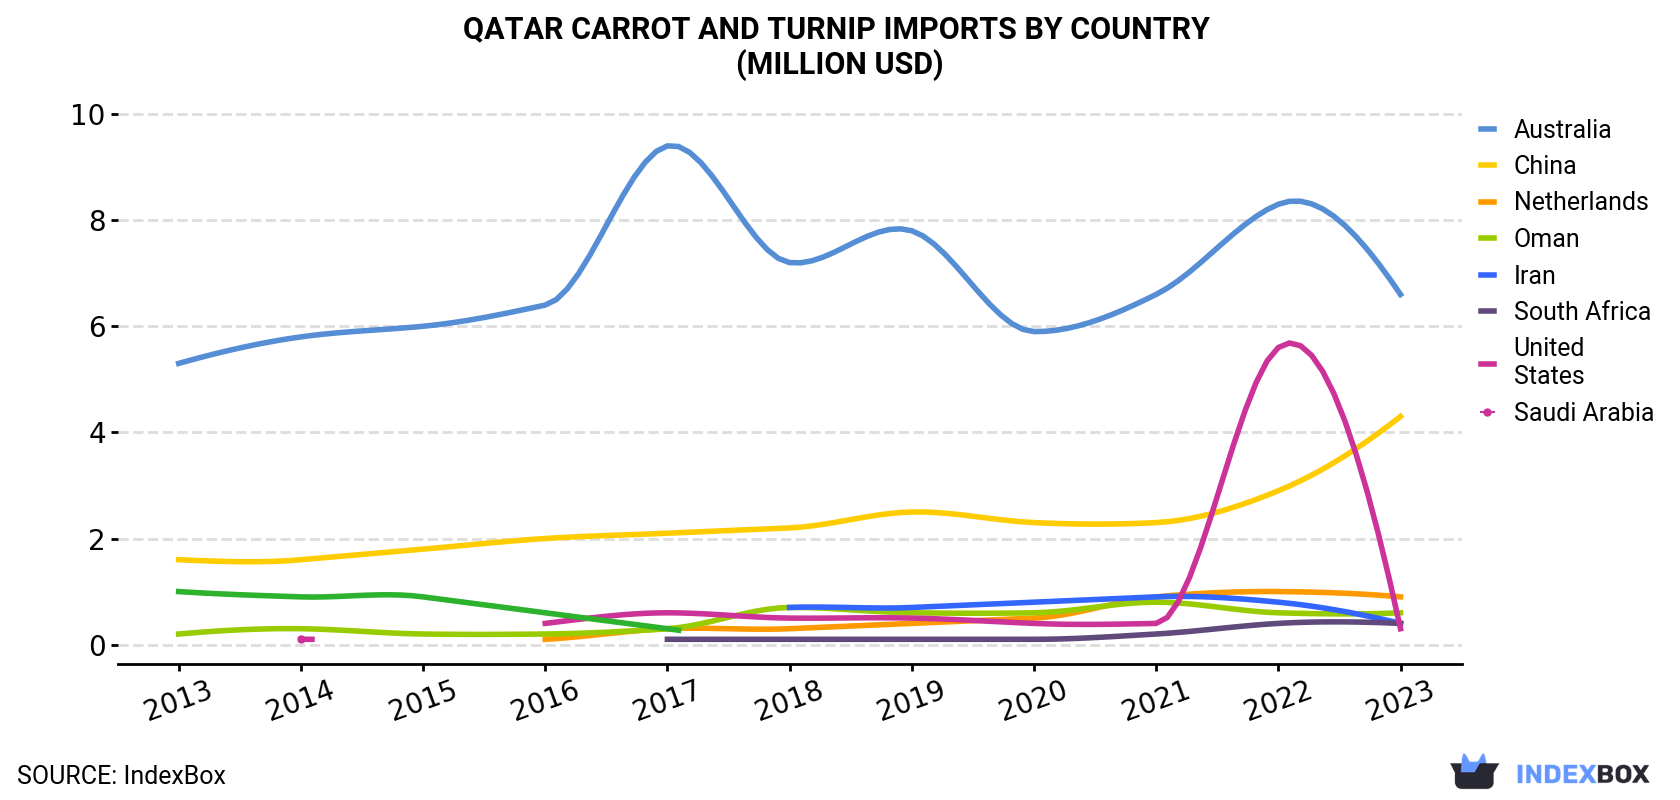 Qatar Carrot And Turnip Imports By Country (Million USD)